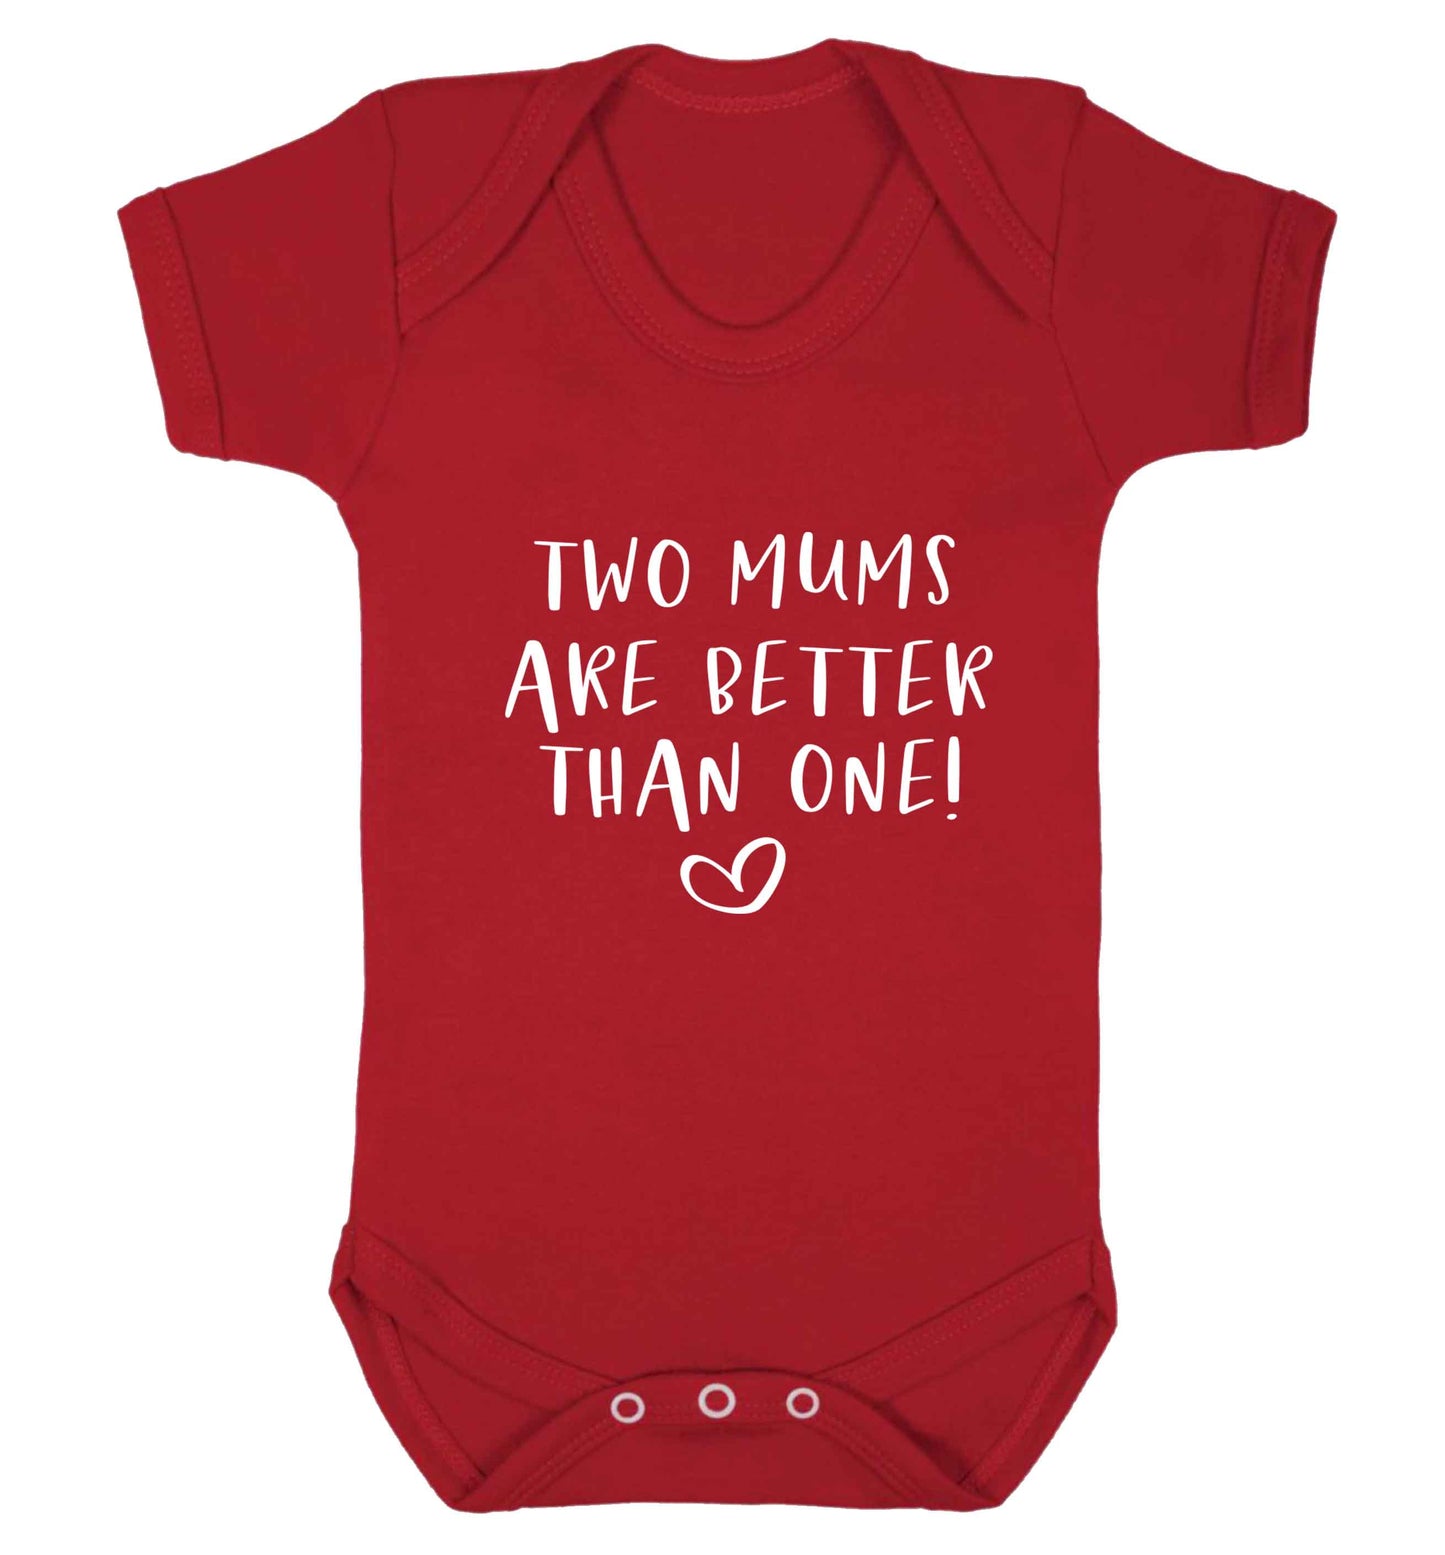 Two mums are better than one baby vest red 18-24 months